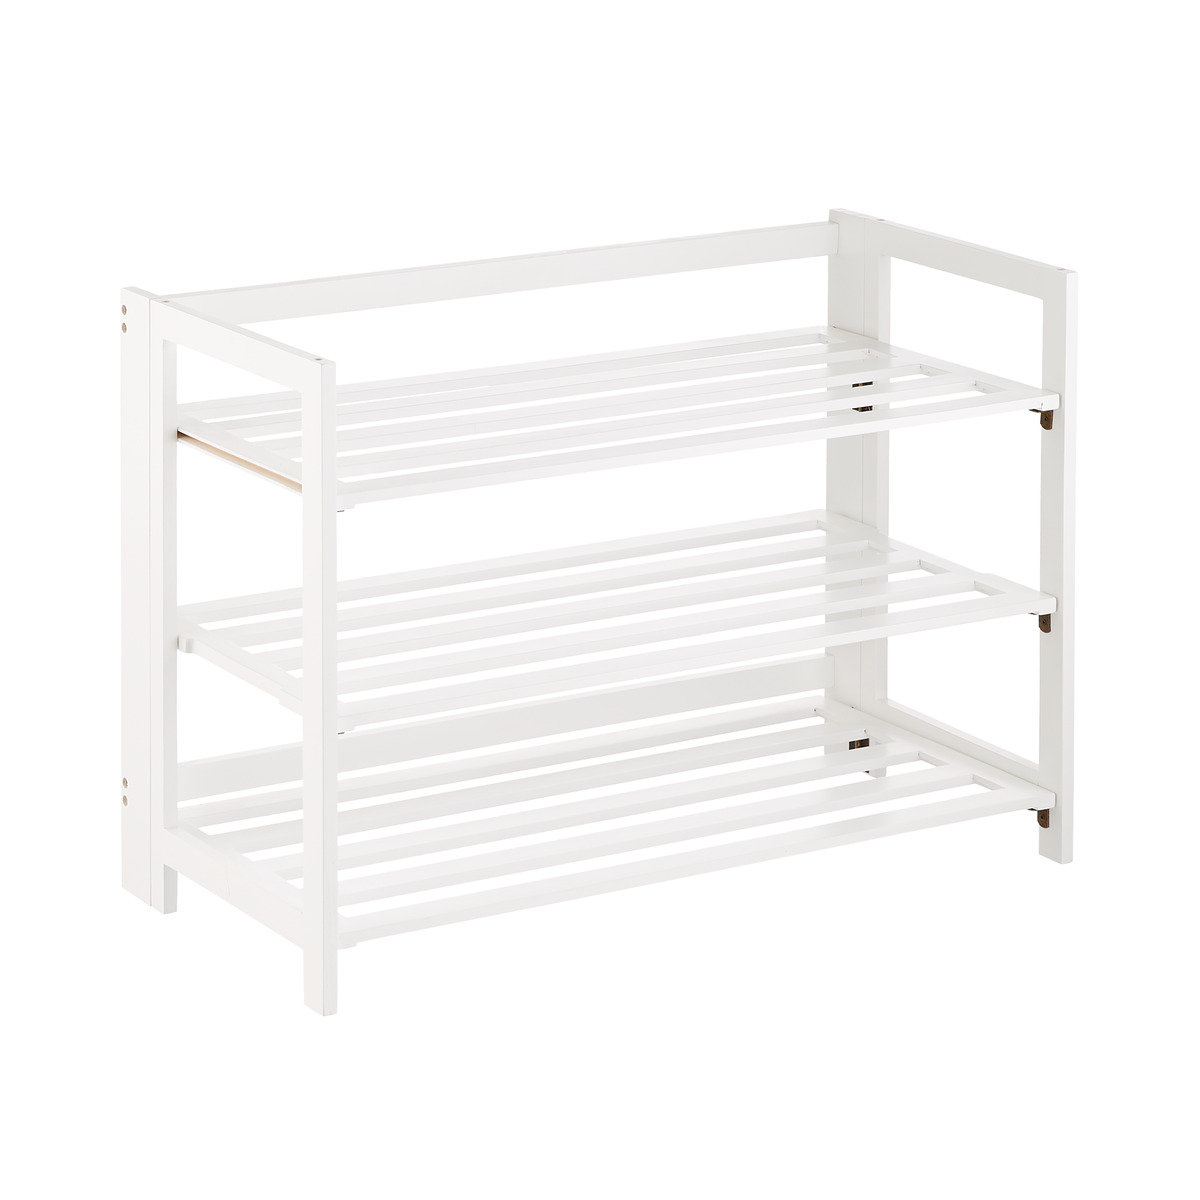 https://www.containerstore.com/catalogimages/384601/10080939-3-tier-white-shoe-rack.jpg